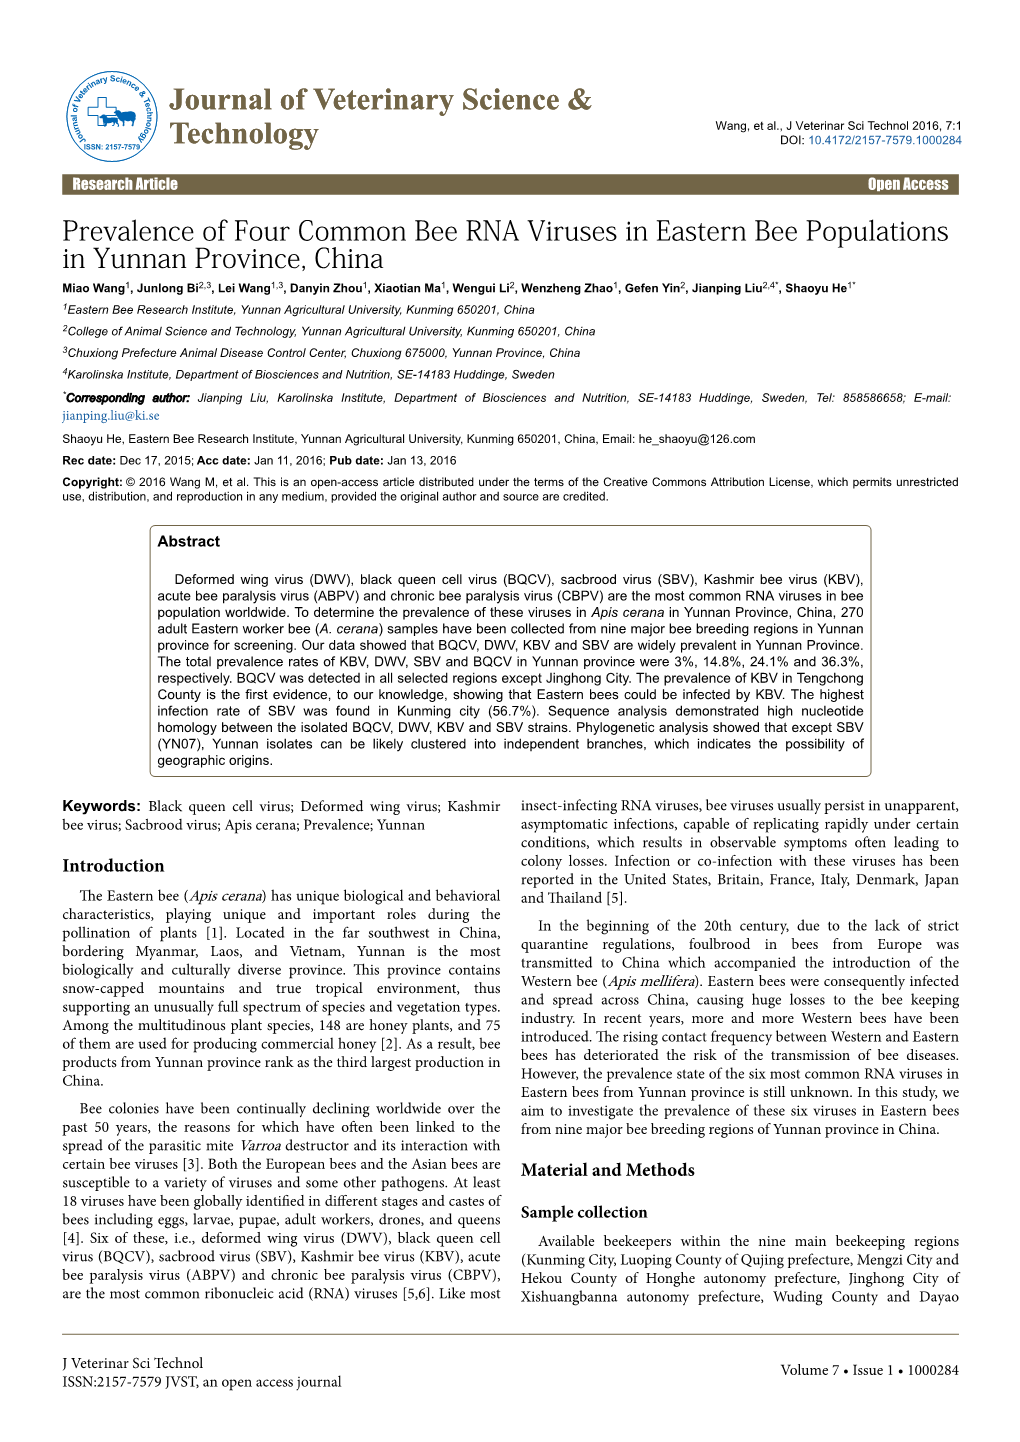 Prevalence of Four Common Bee RNA Viruses in Eastern Bee